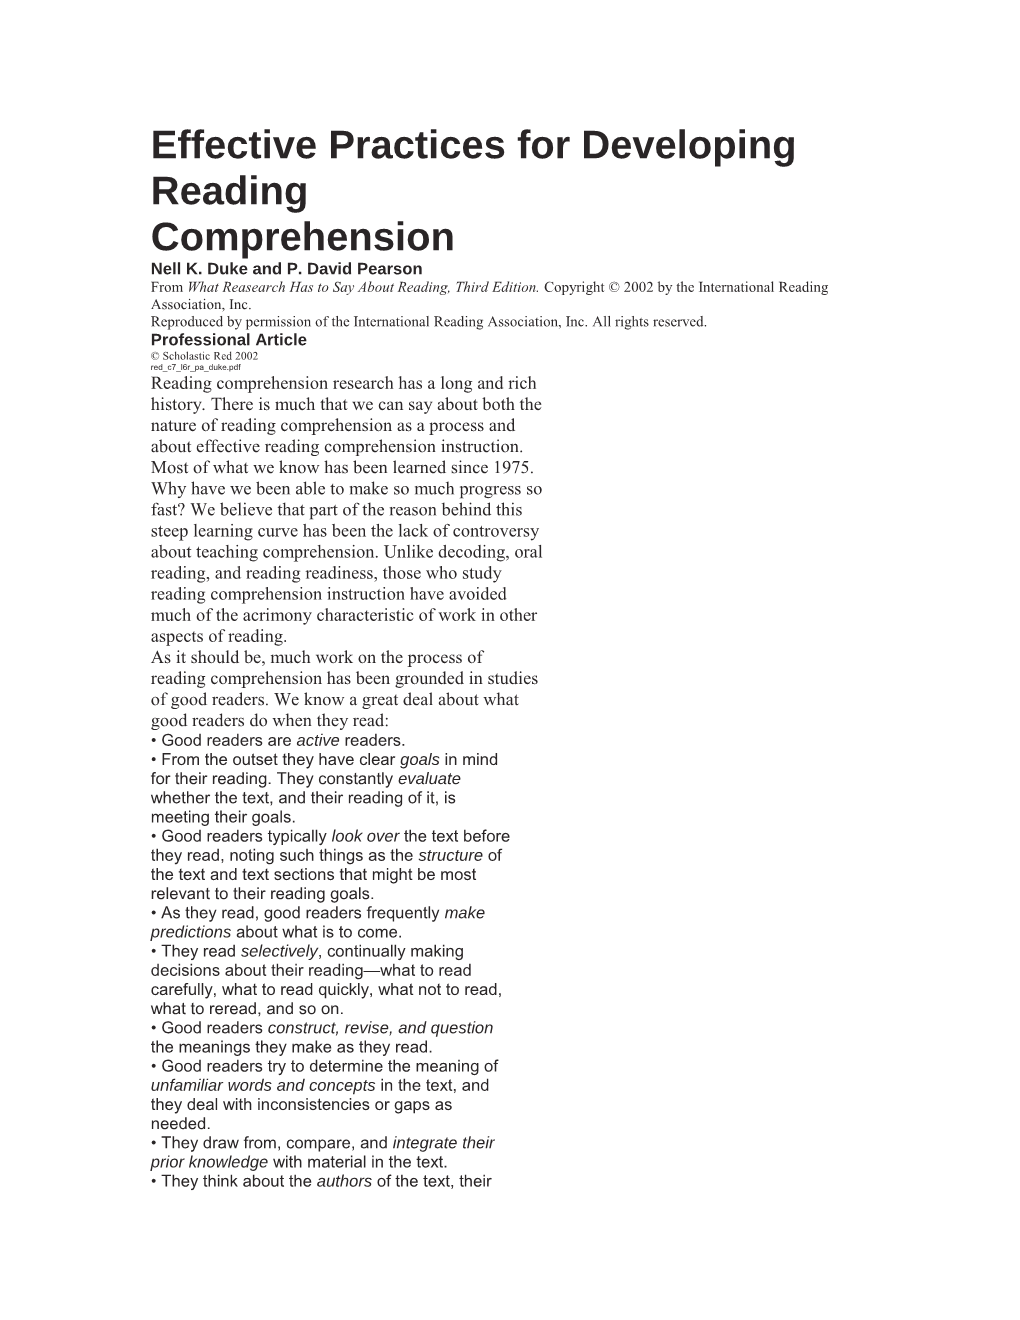 Effective Practices for Developing Reading